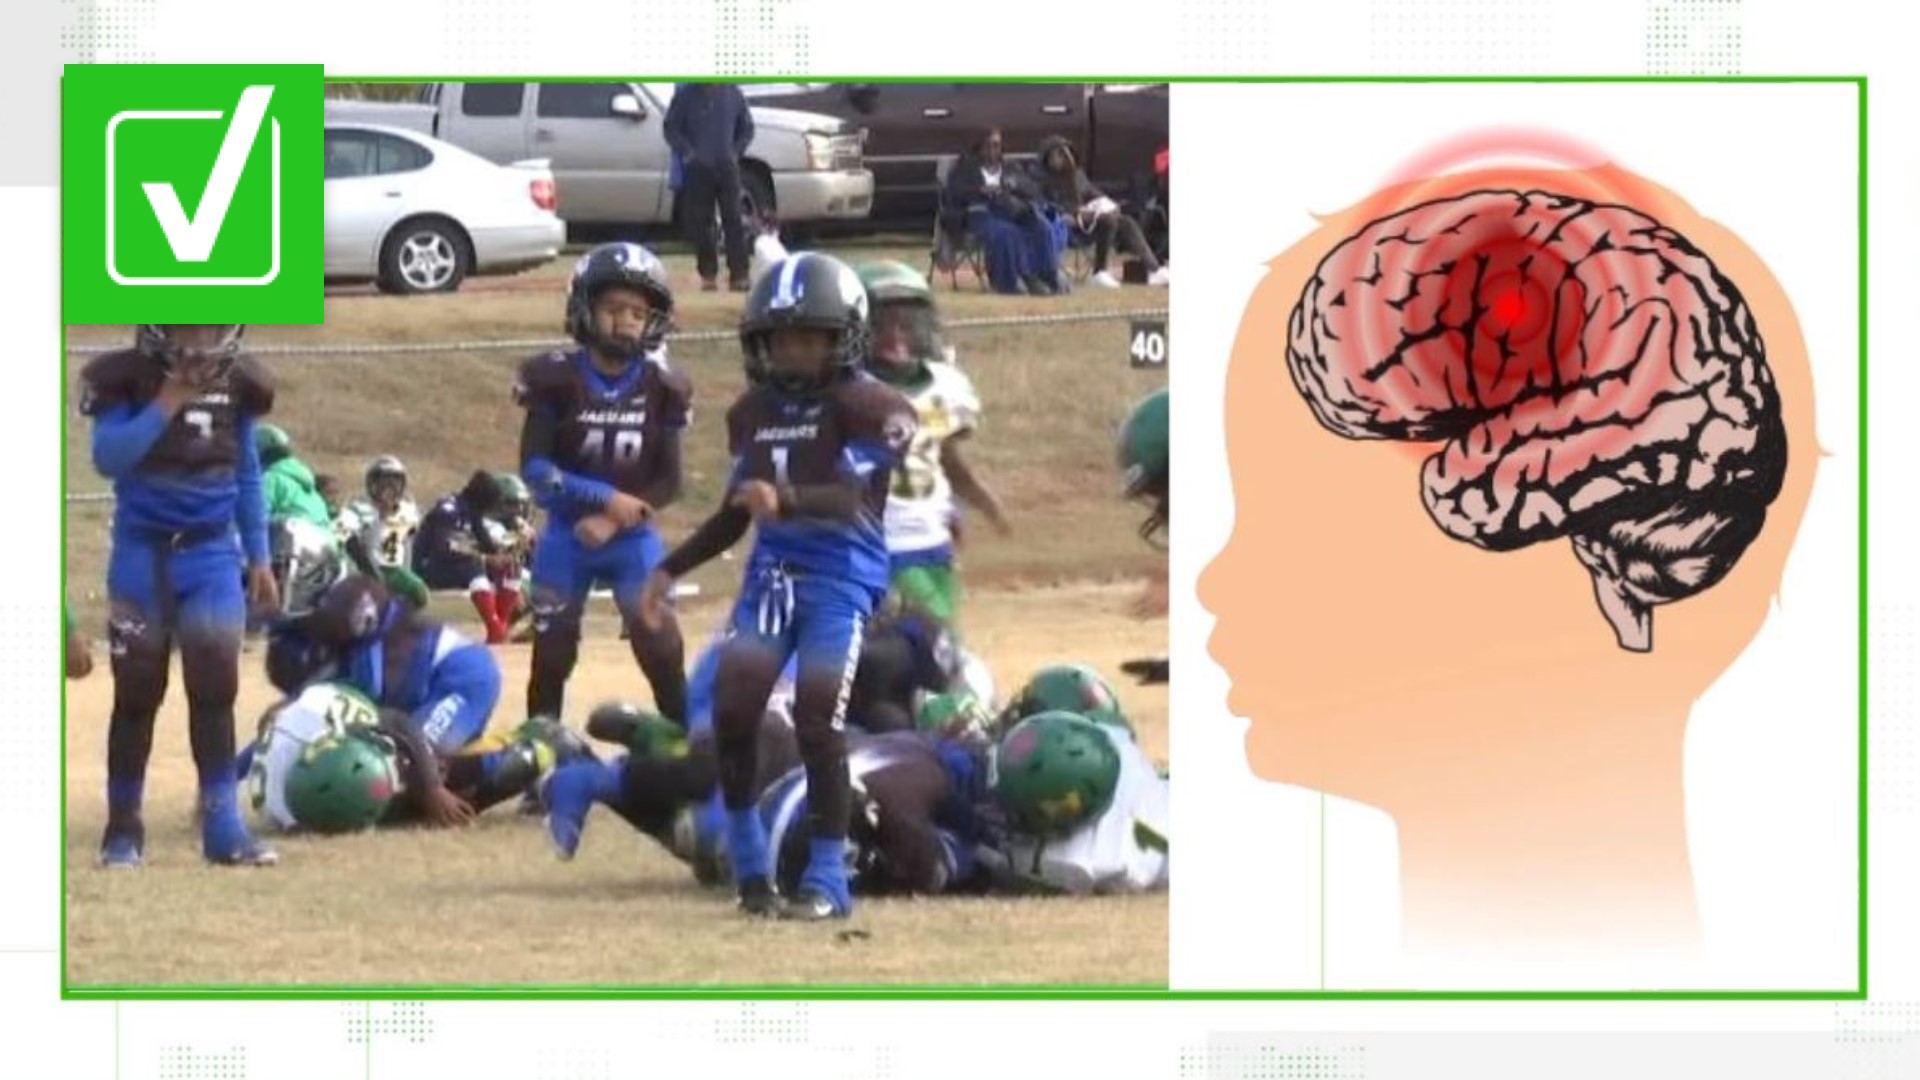 Experts say kids under the age of 14 are more at risk for CTE playing tackle football. Here's why.